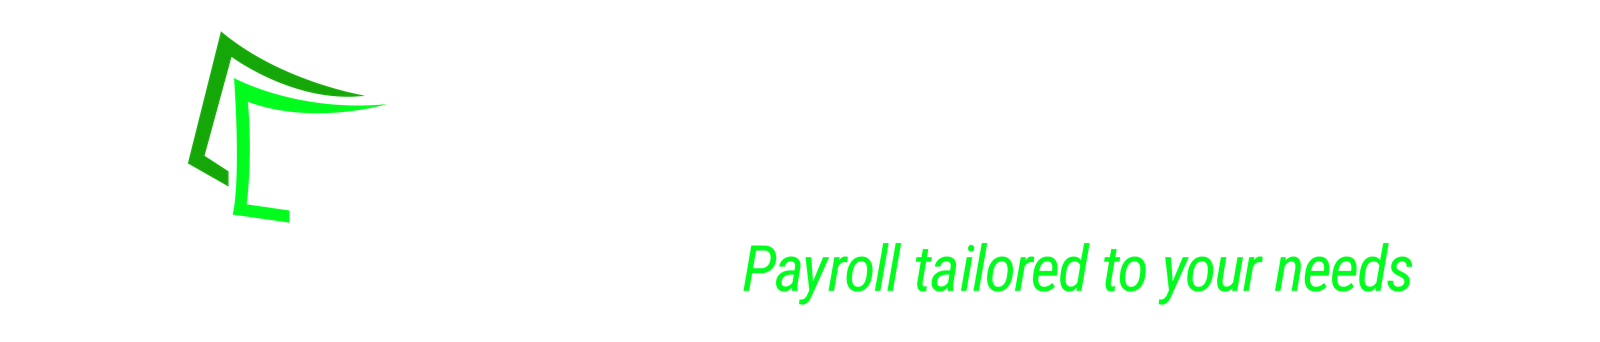 Total Payroll Solution